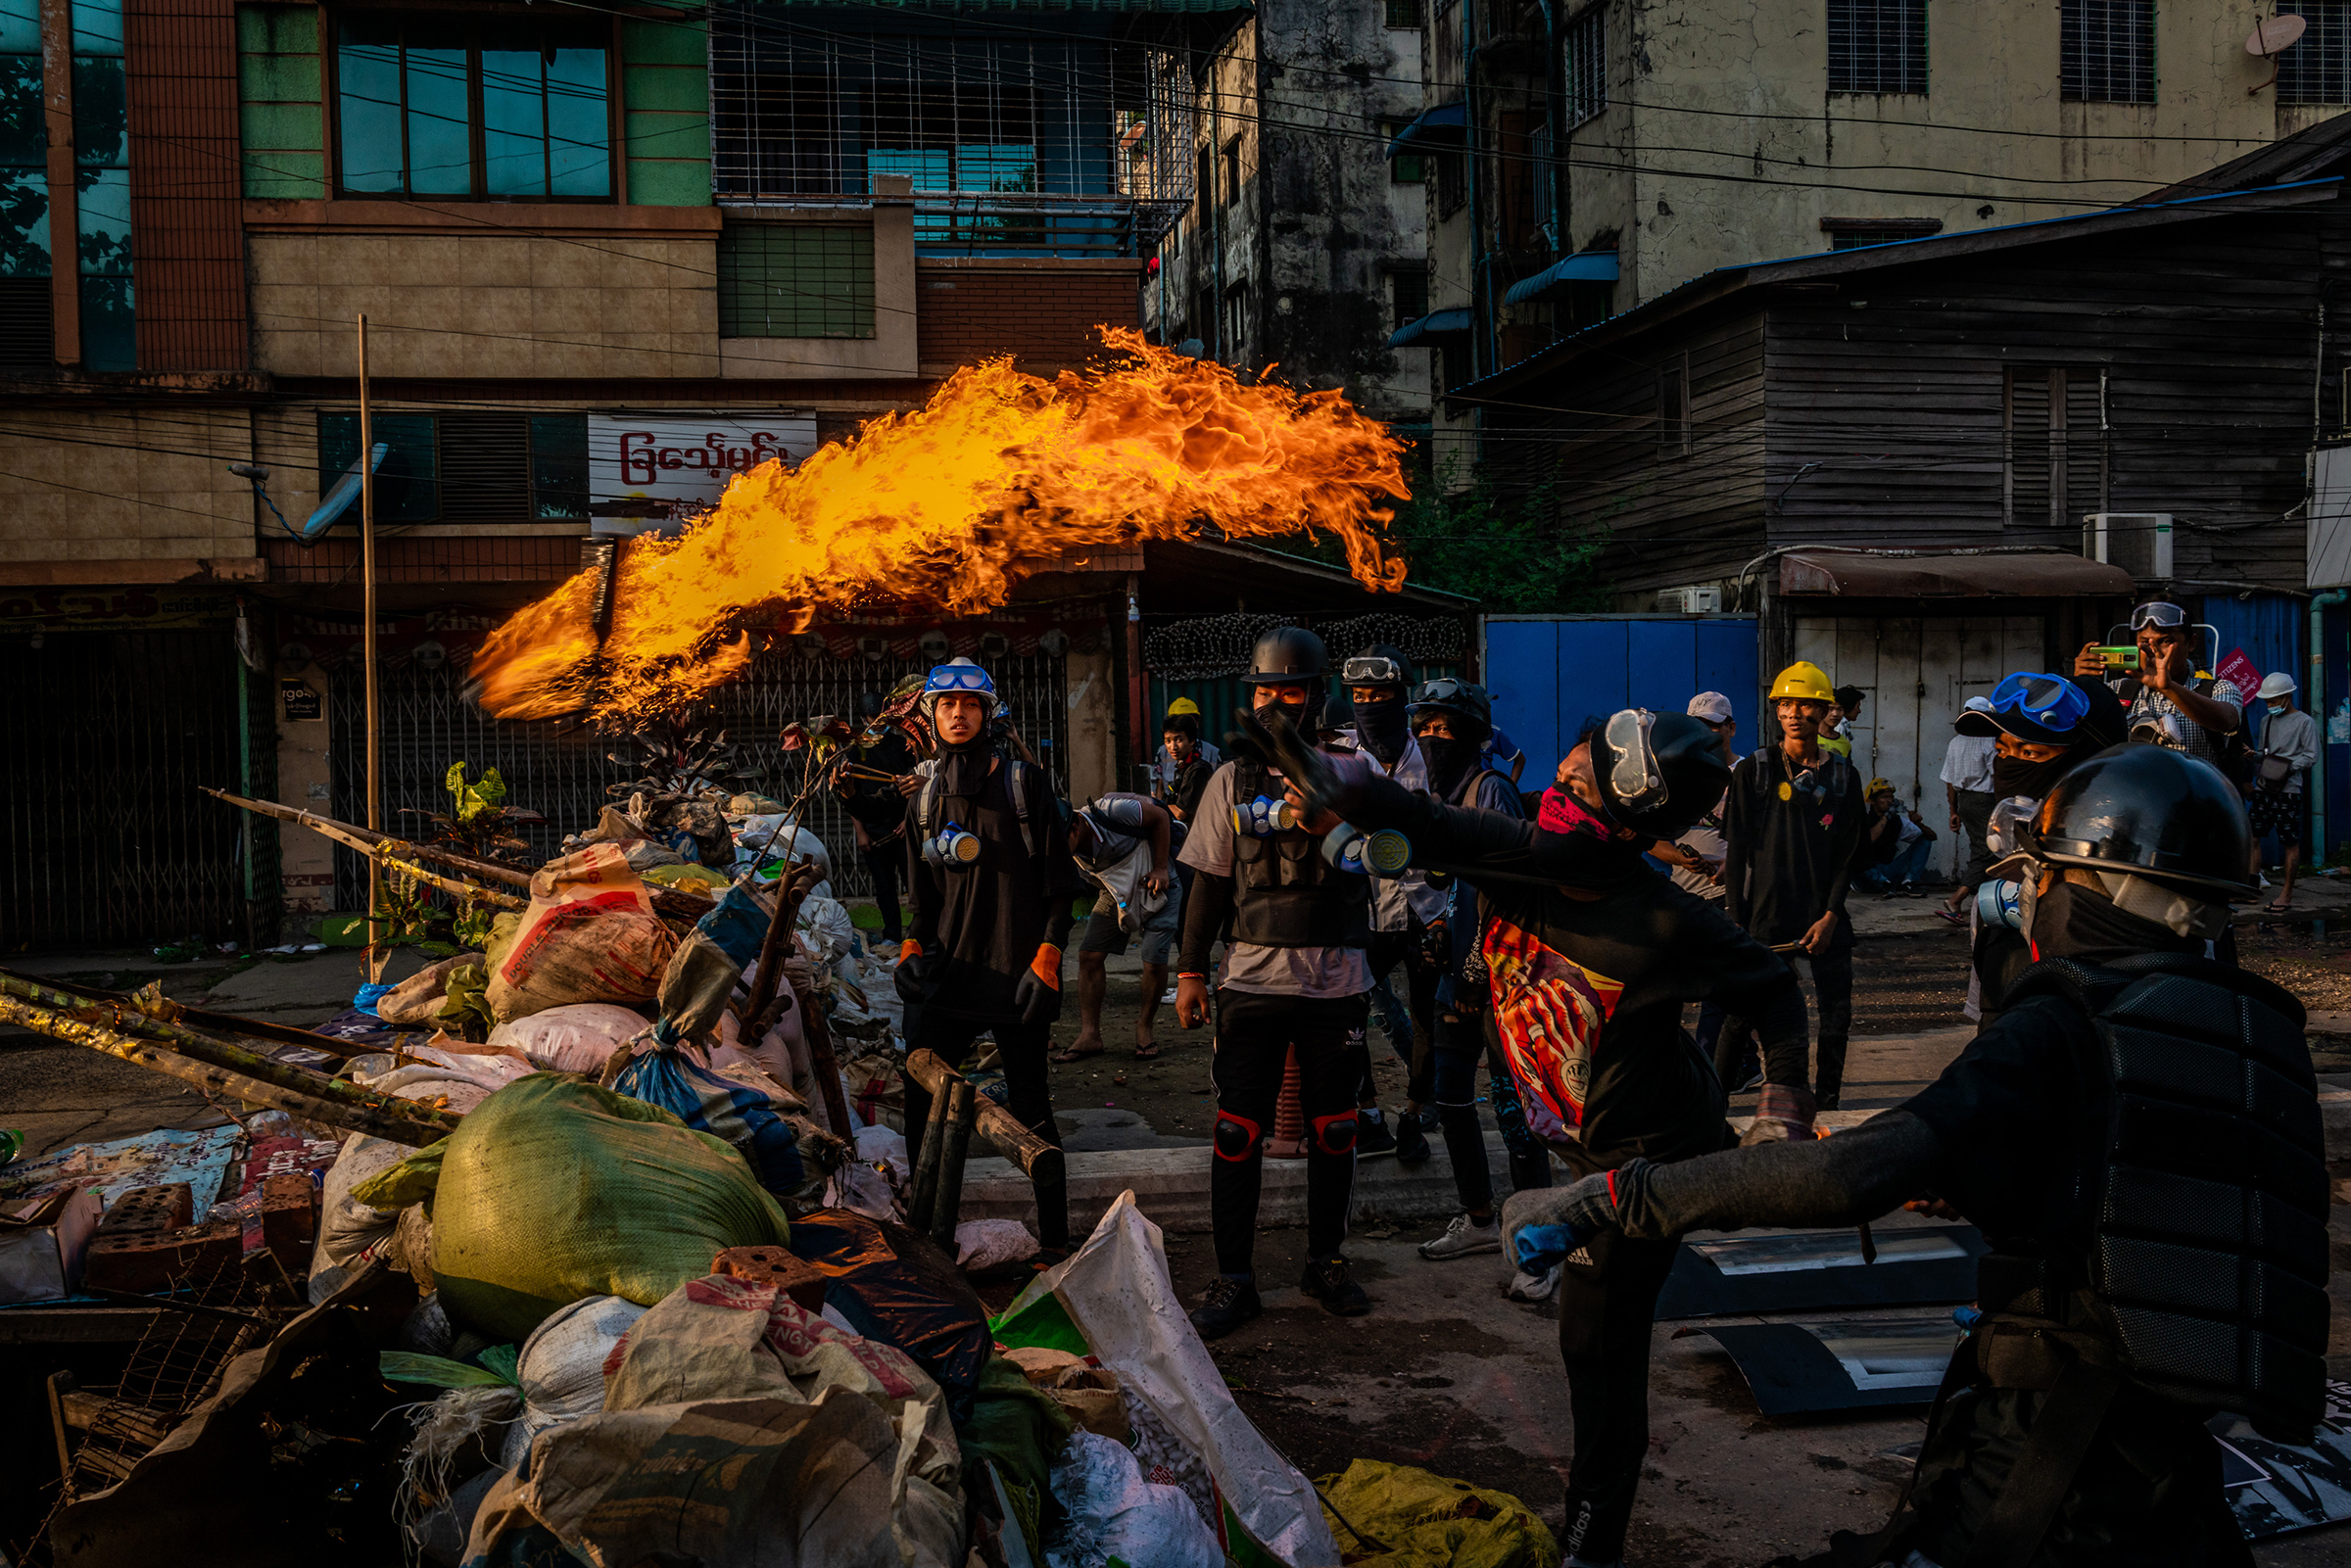 After Myanmar’s military deposed an elected government, protesters launched the “Spring Revolution”—and, on March 16 in Yangon, this firebomb. (Stringer/Getty Images)